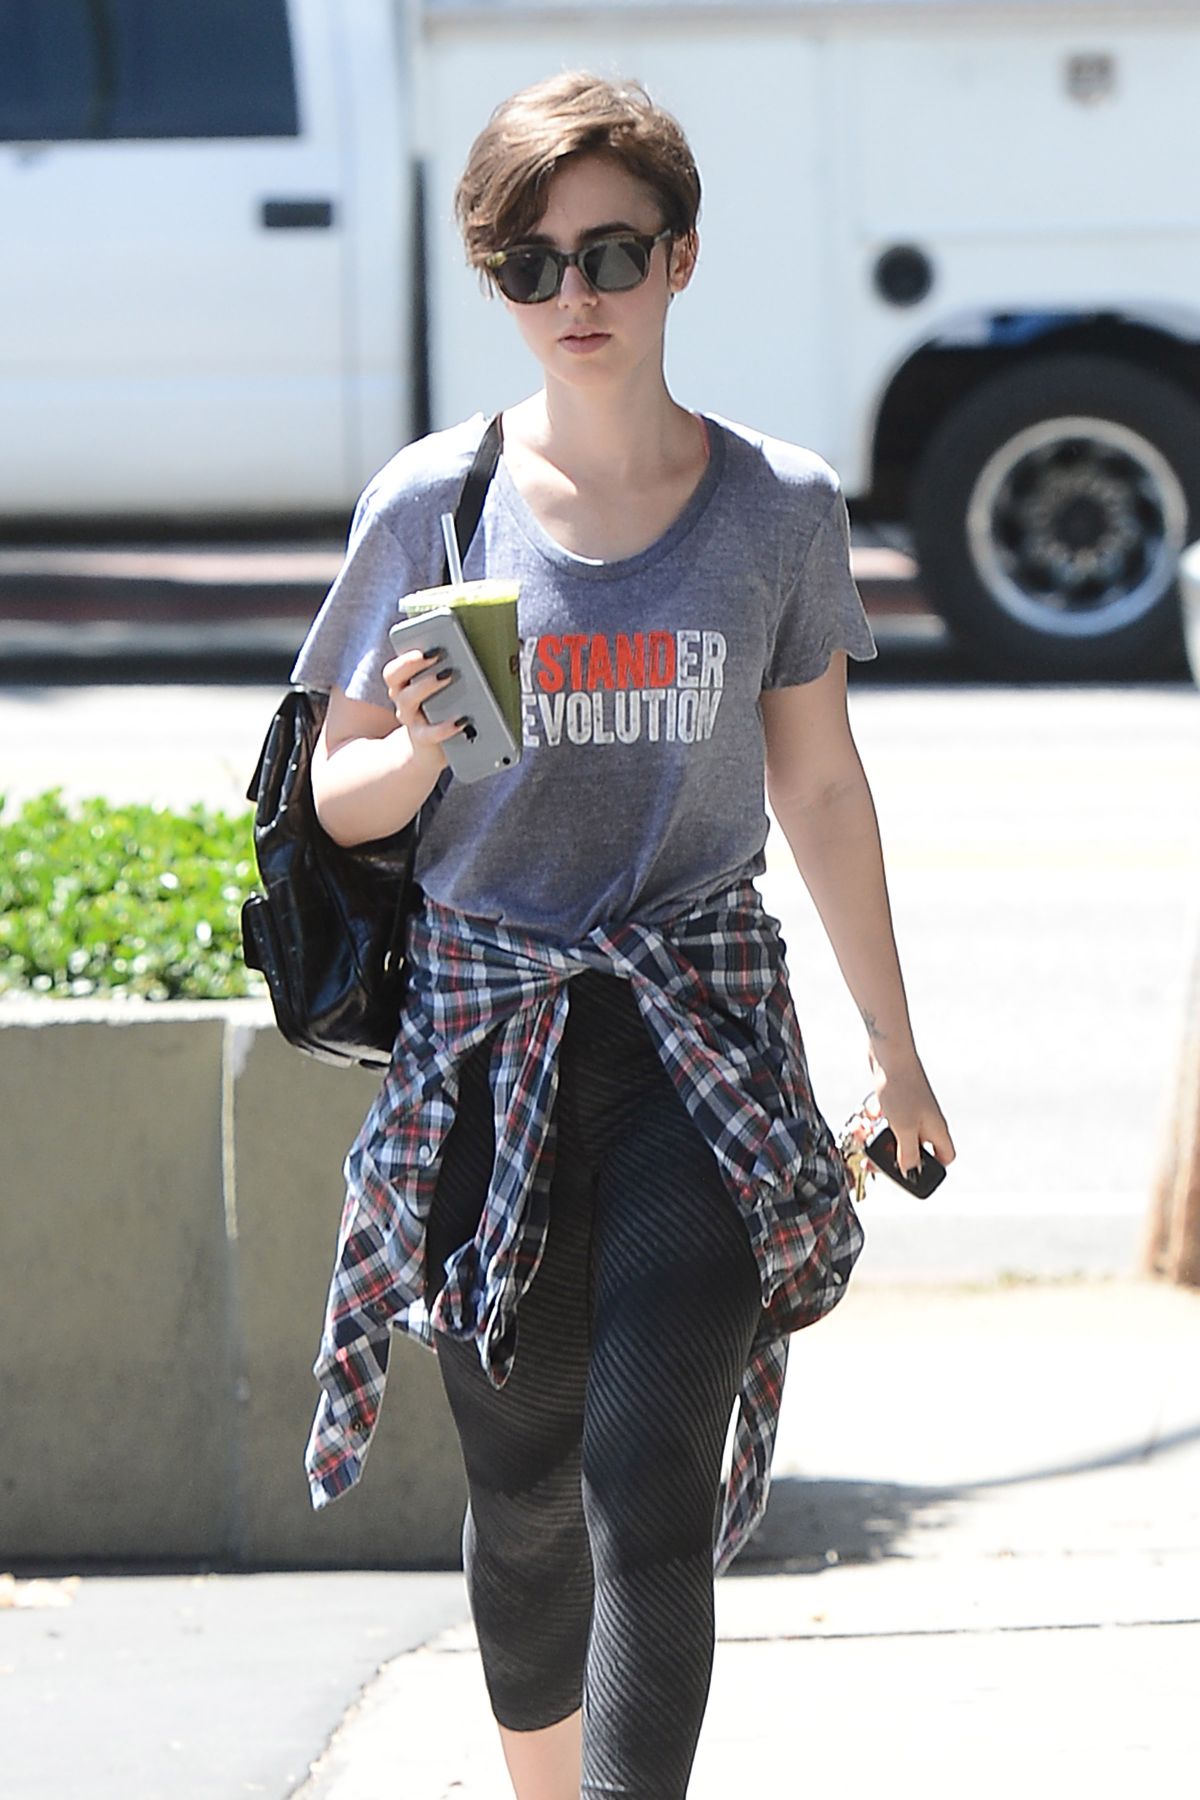 LILY COLLINS in Leggings Out and About in Los Angeles 05/01/2015 ...